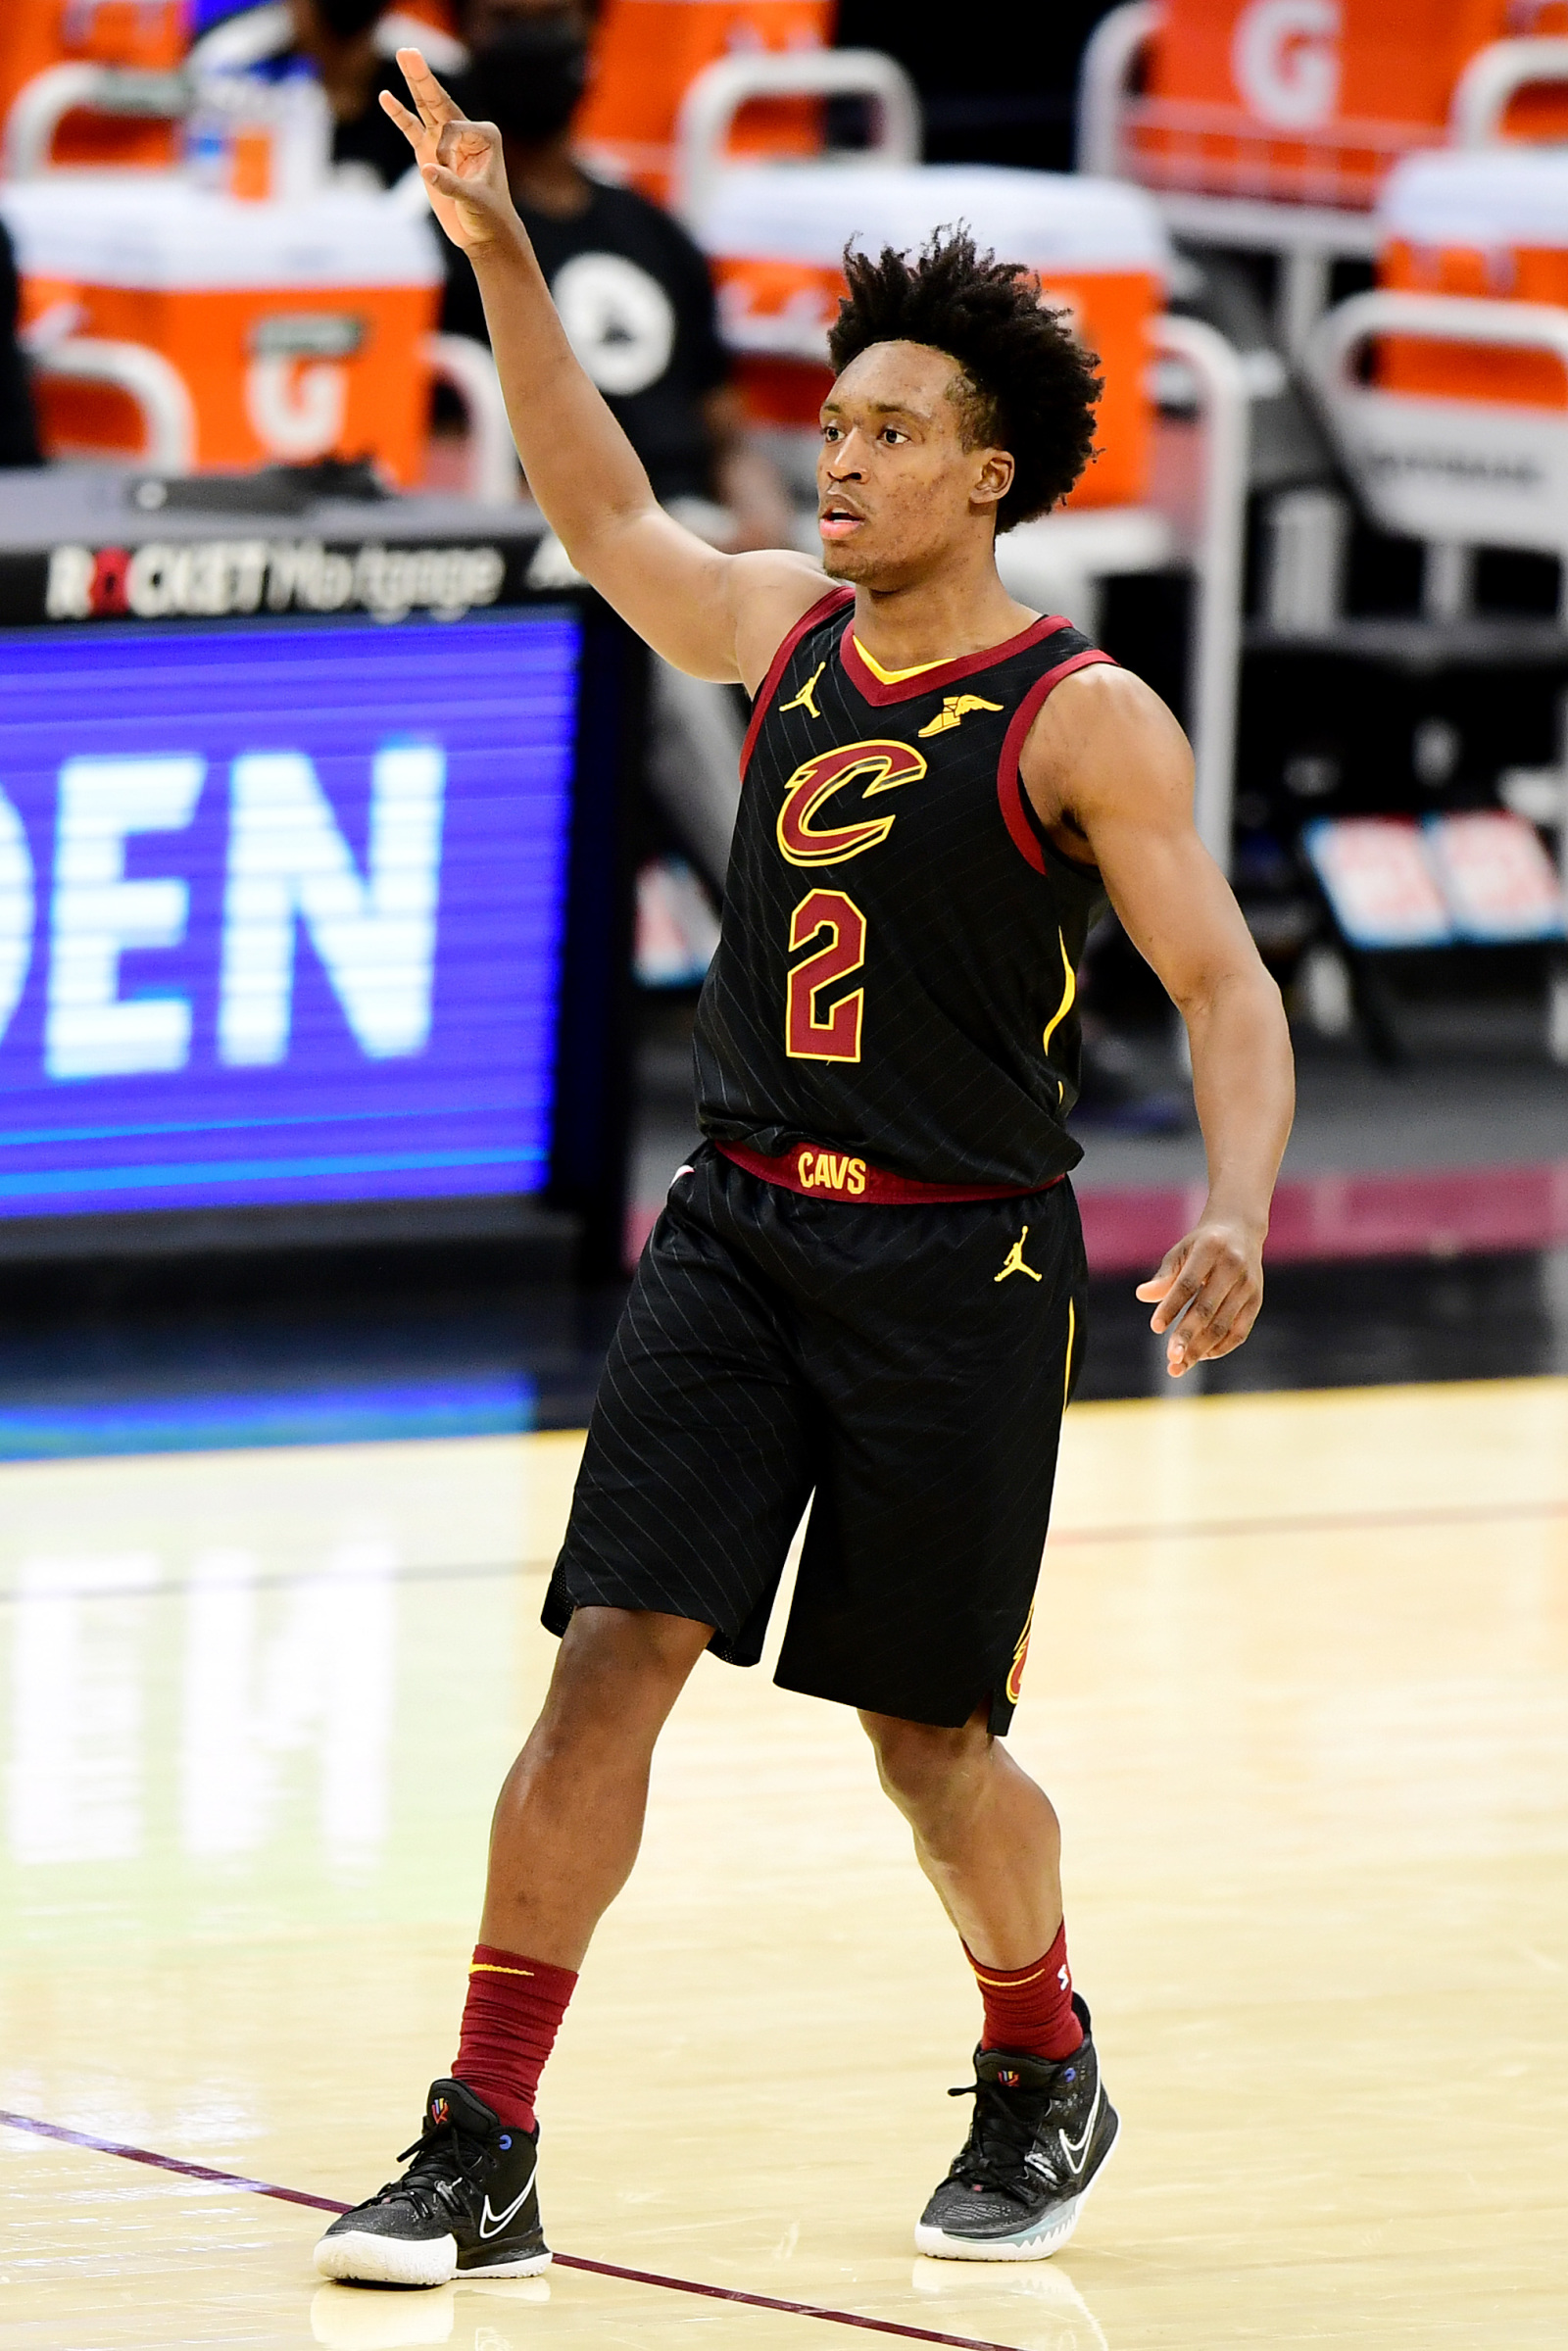 Source Collin Sexton Best Quality Stitched Basketball Jerseys on m